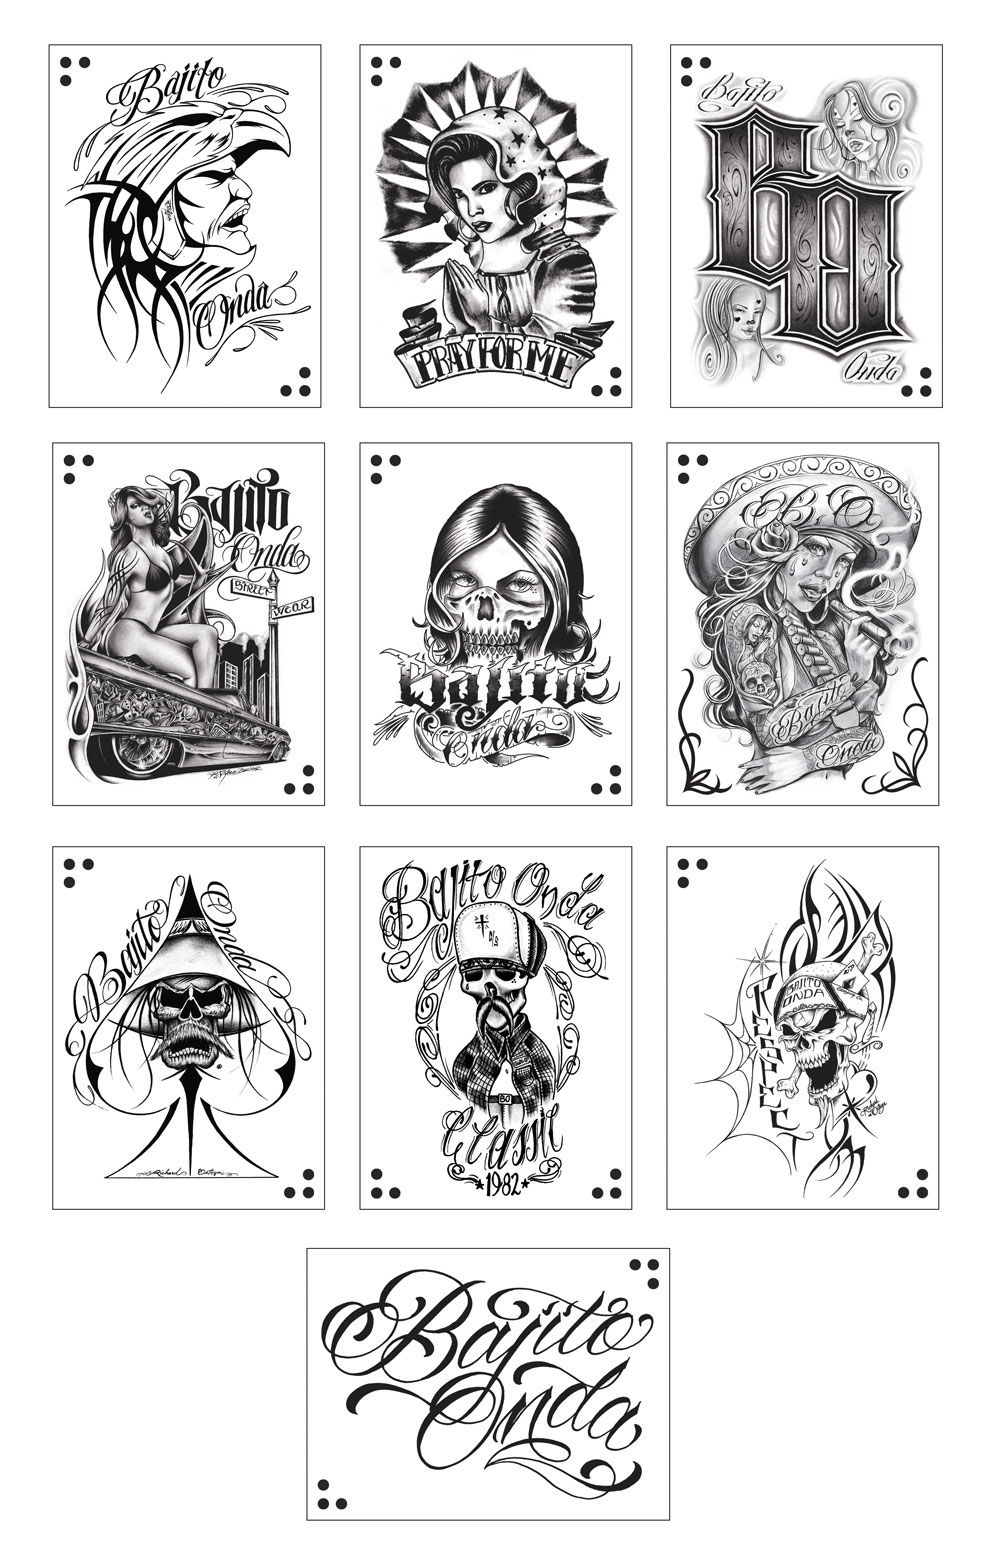 World's Largest Manufacturer of Temporary Tattoos Signs License Agreement  with Urban Art Non-Profit